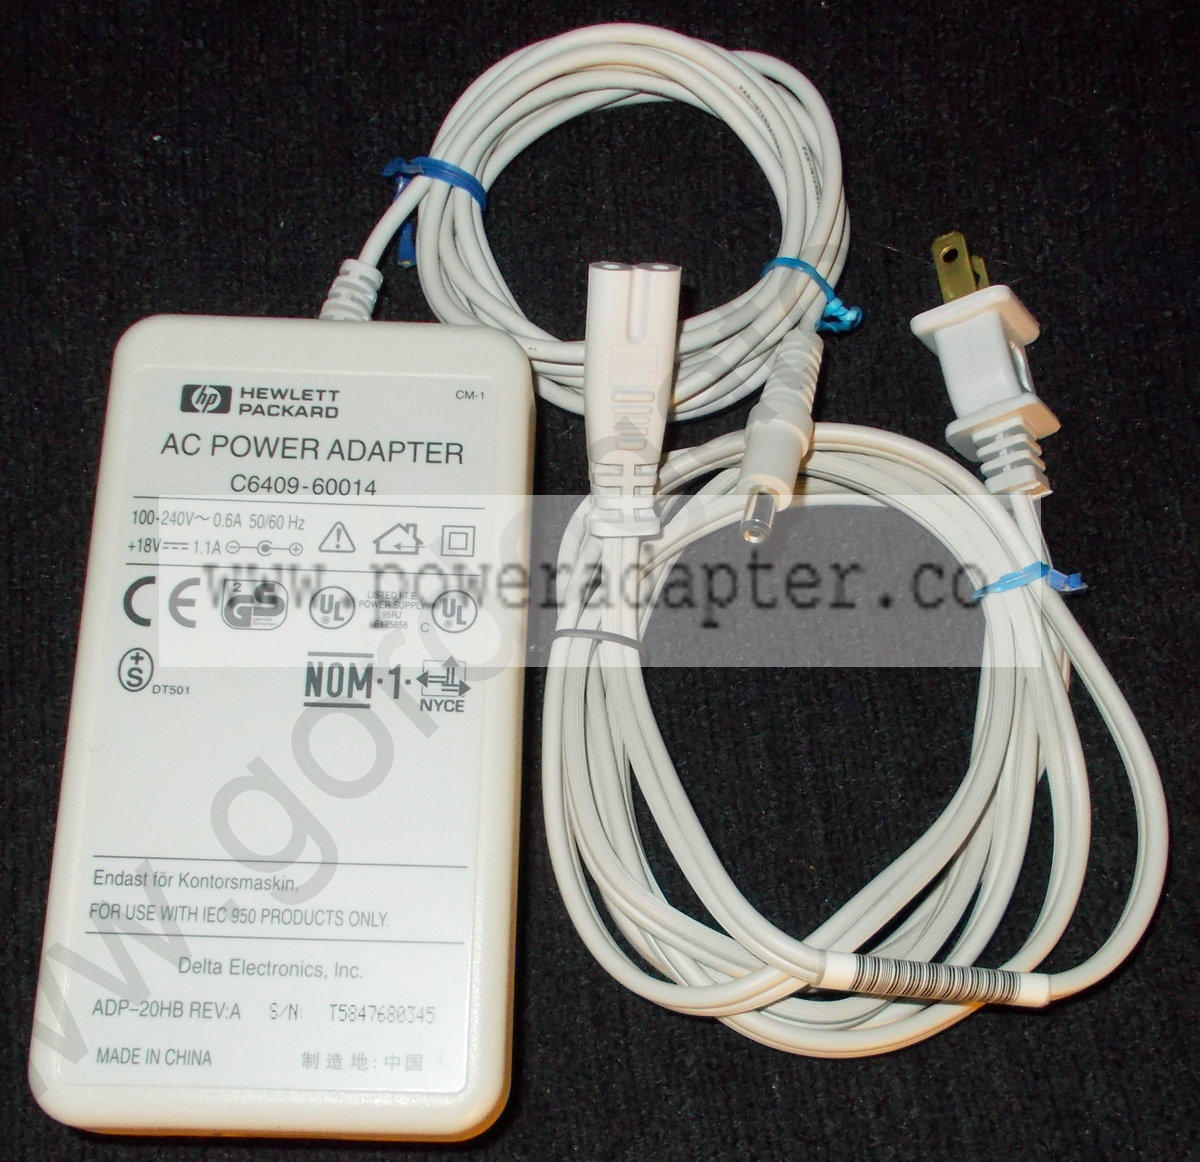 HP DeskJet AC Adapter Power Supply 18V DC, 1.1A [C6409-60014] This AC adapter is for use with some HP DeskJet Printers